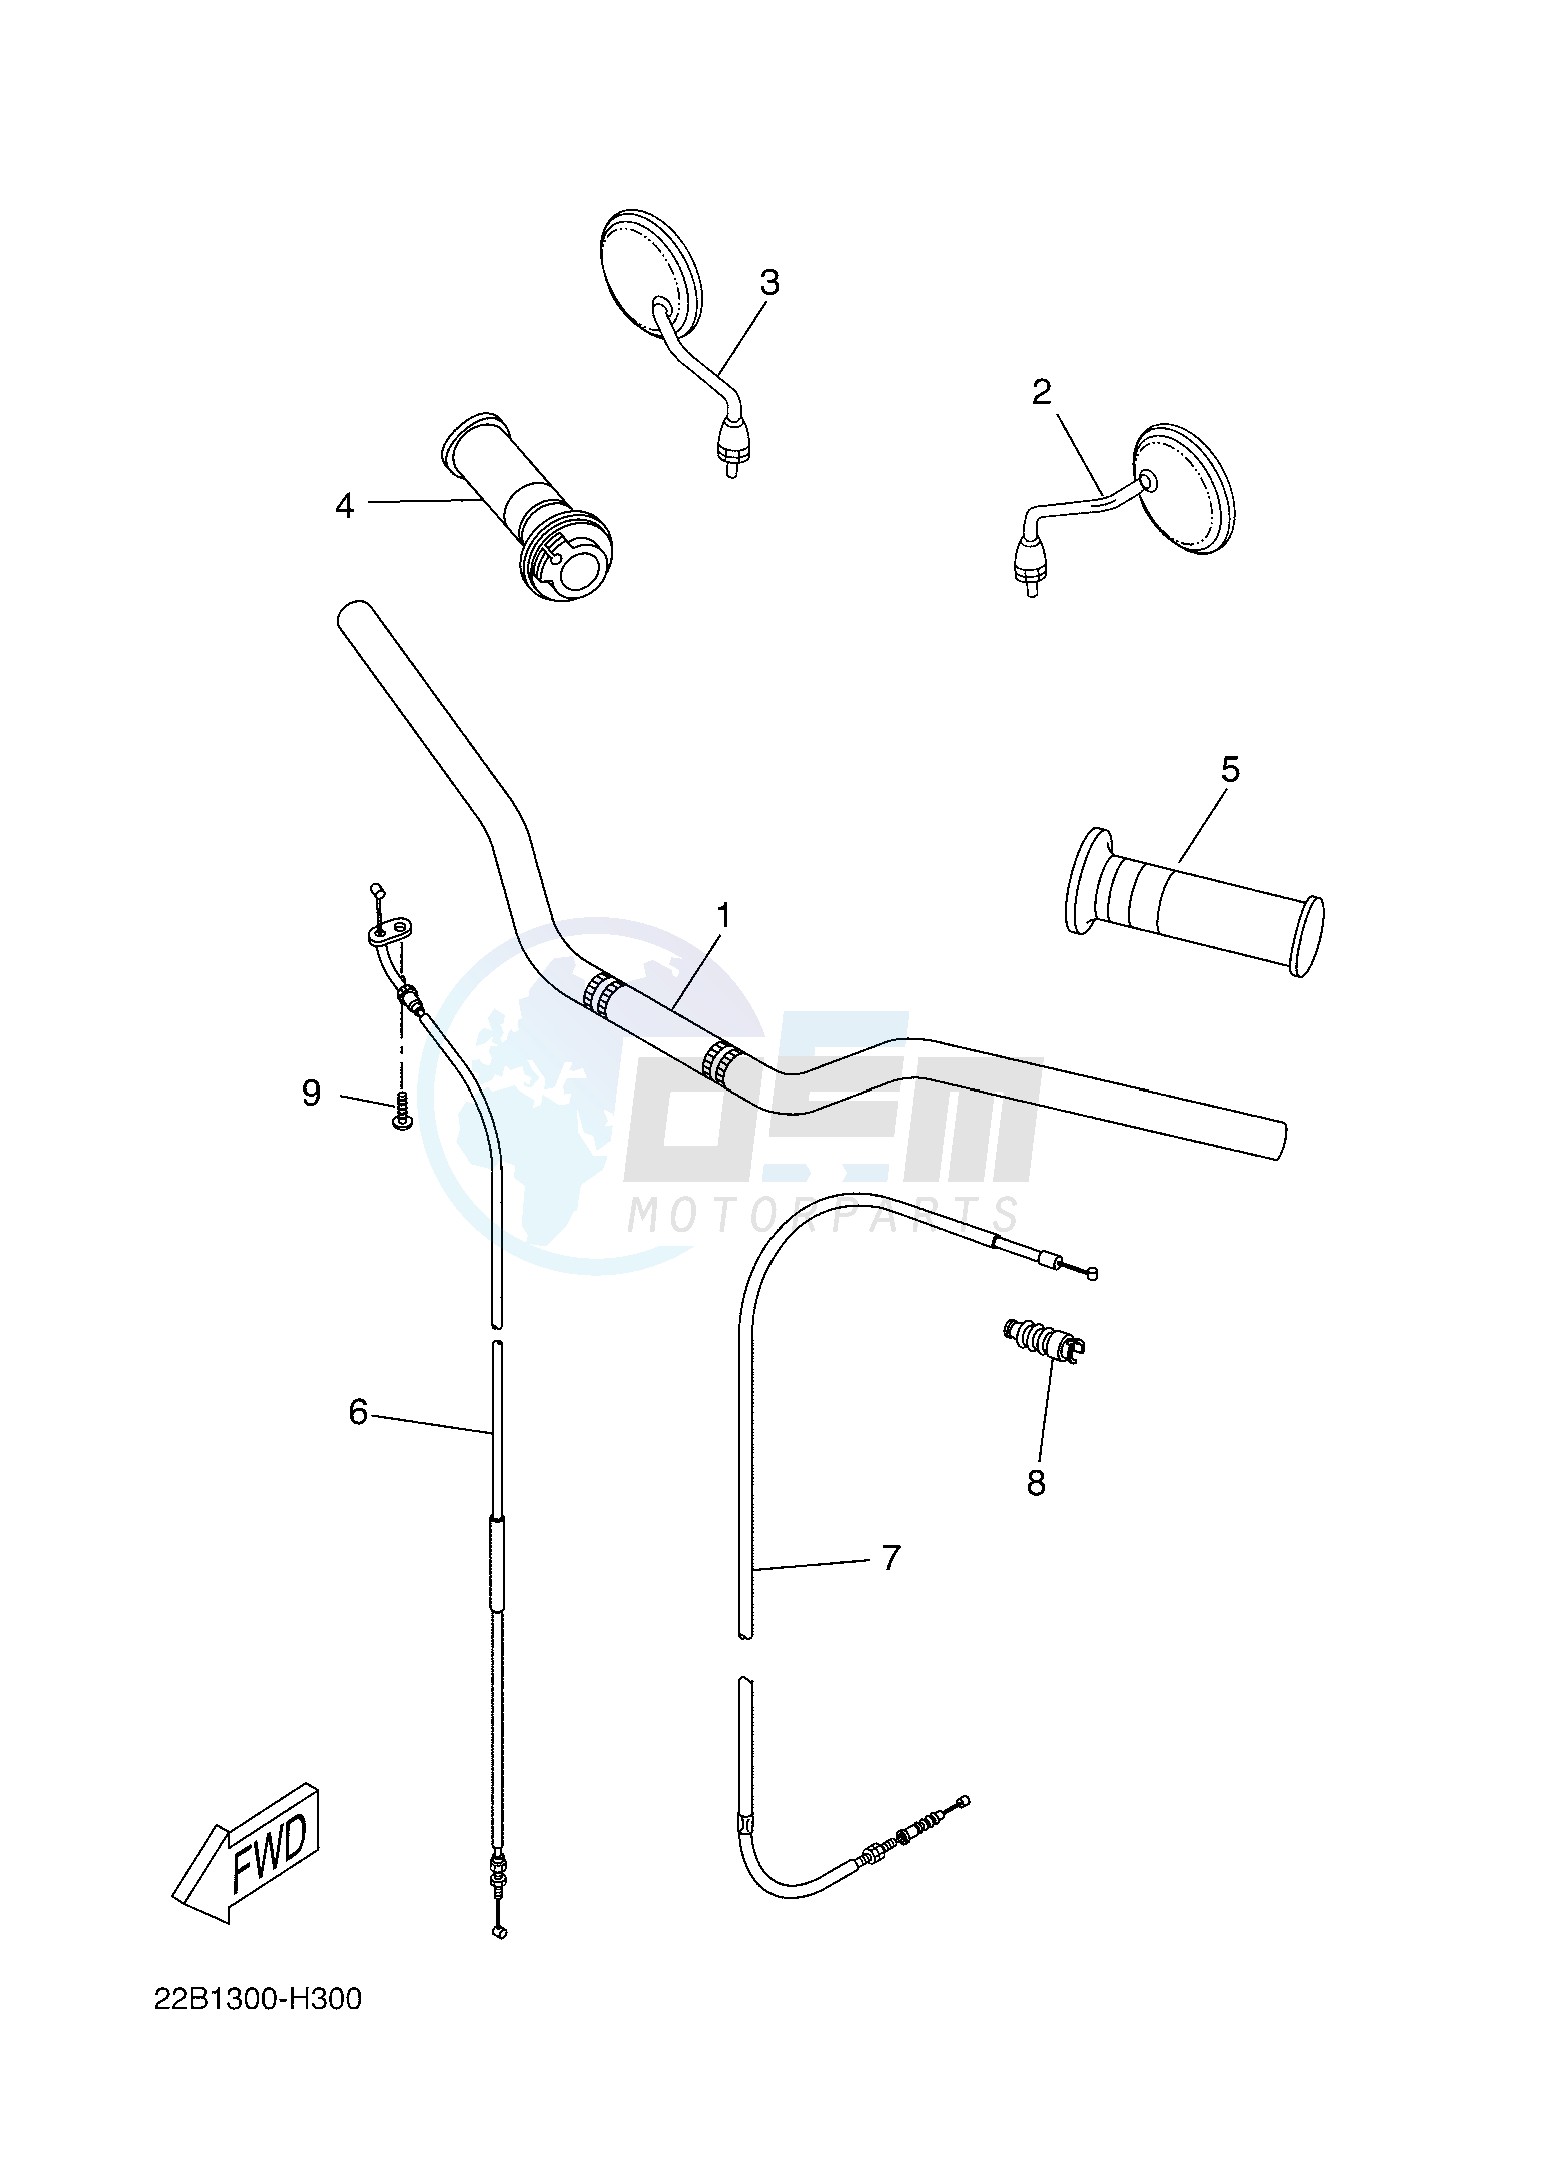 STEERING HANDLE & CABLE blueprint